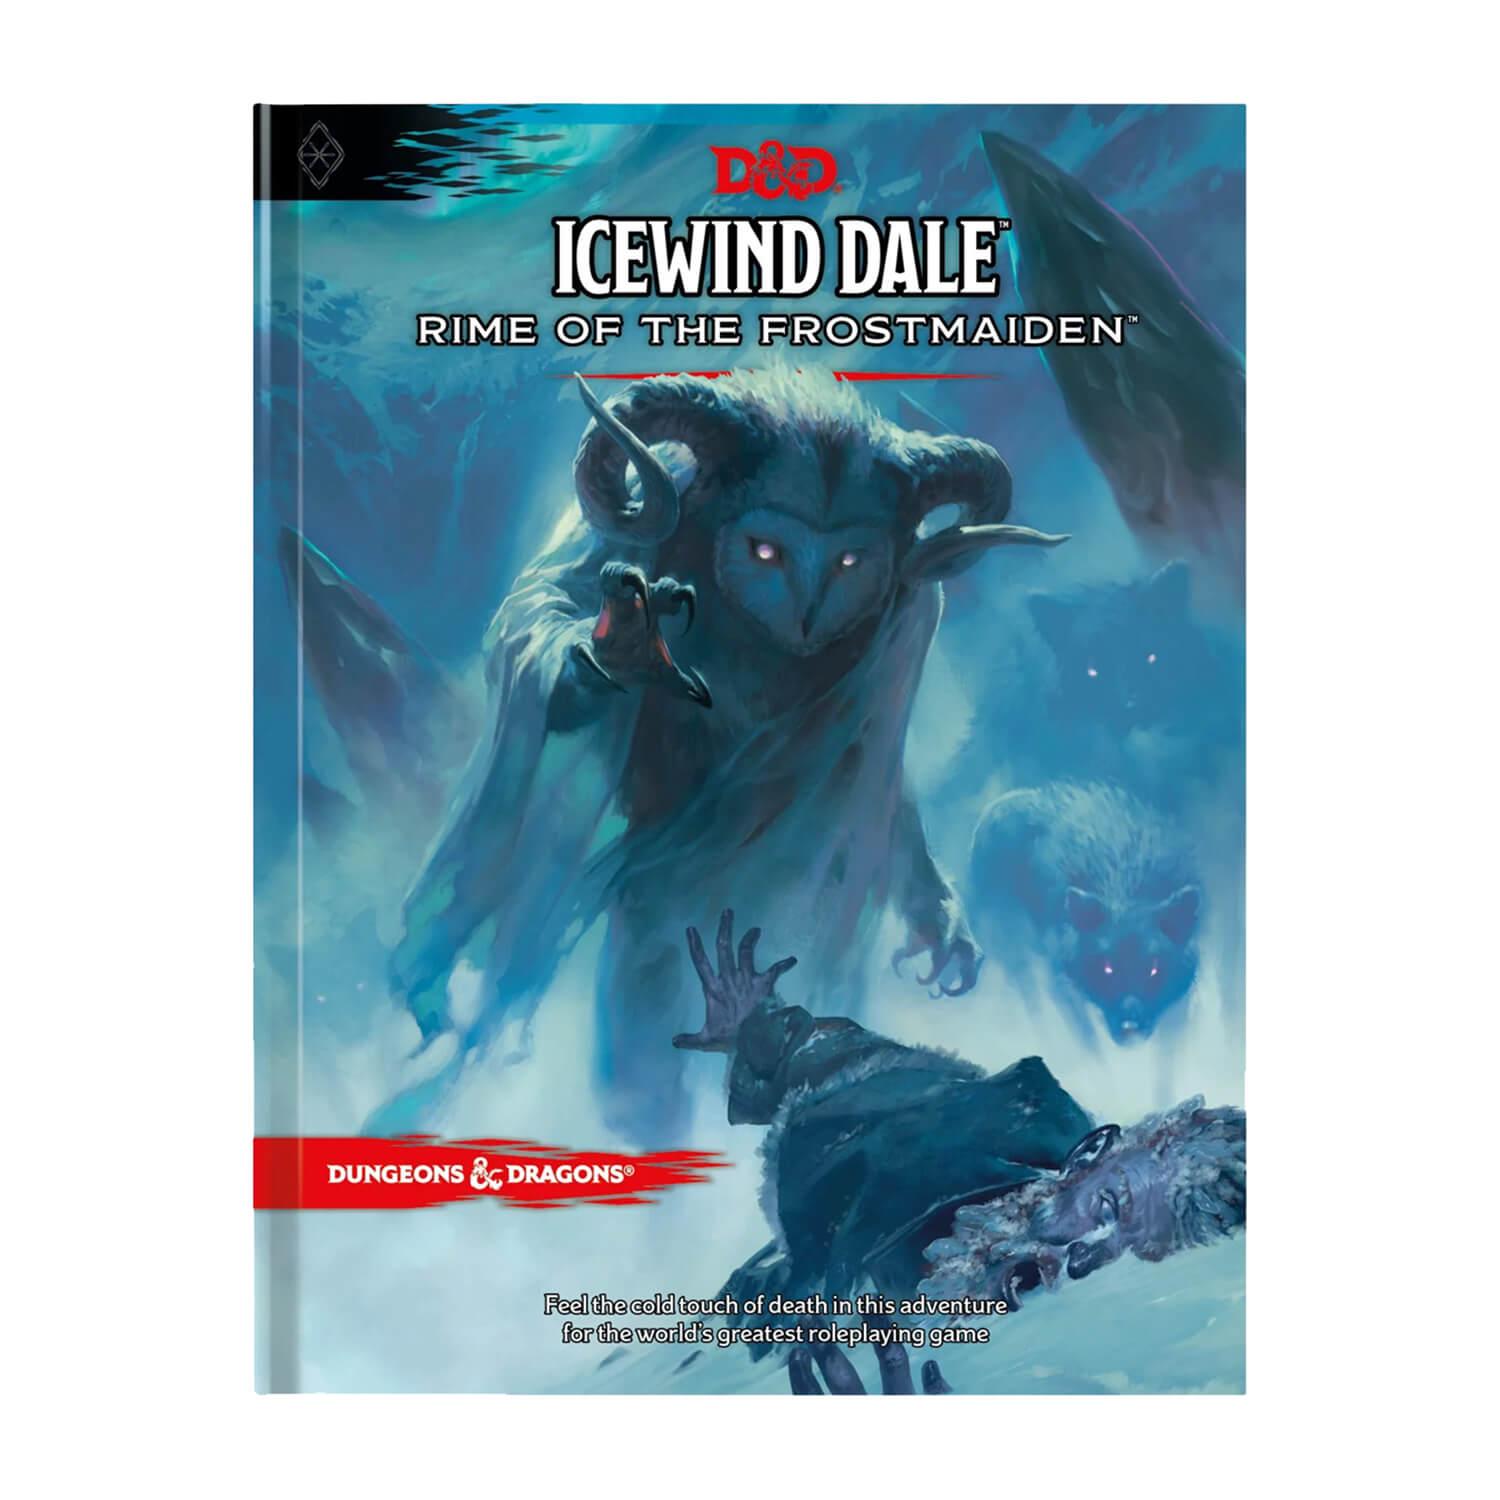 Dungeons & Dragons Icewind Dale